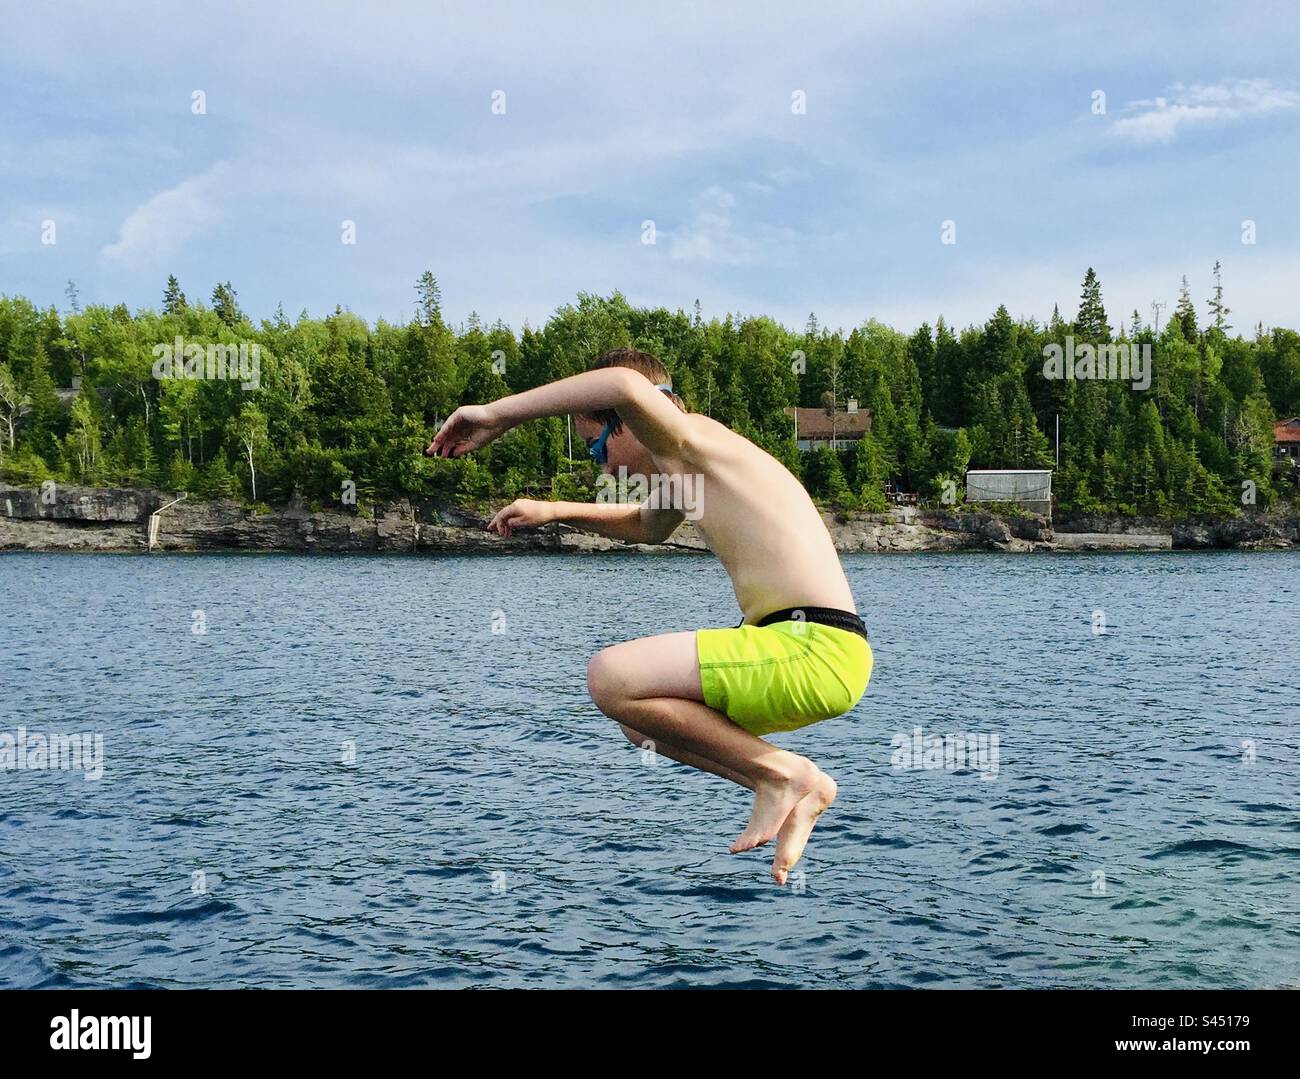 Jumping into summer. Stock Photo